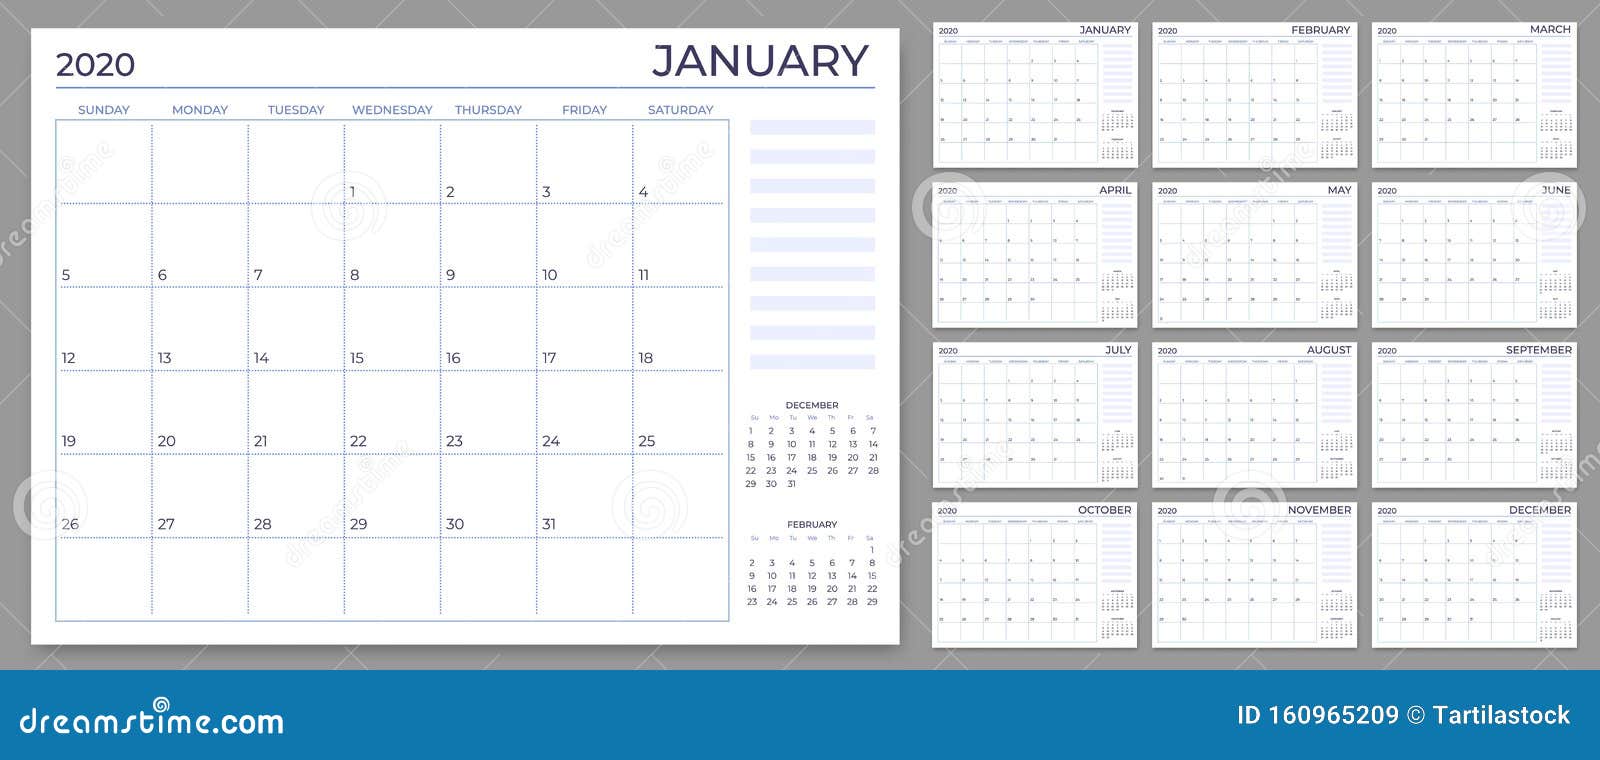 monthly planner template. year calendar notes grid, 2020 planners sheets and yearly scheduling calendars  set